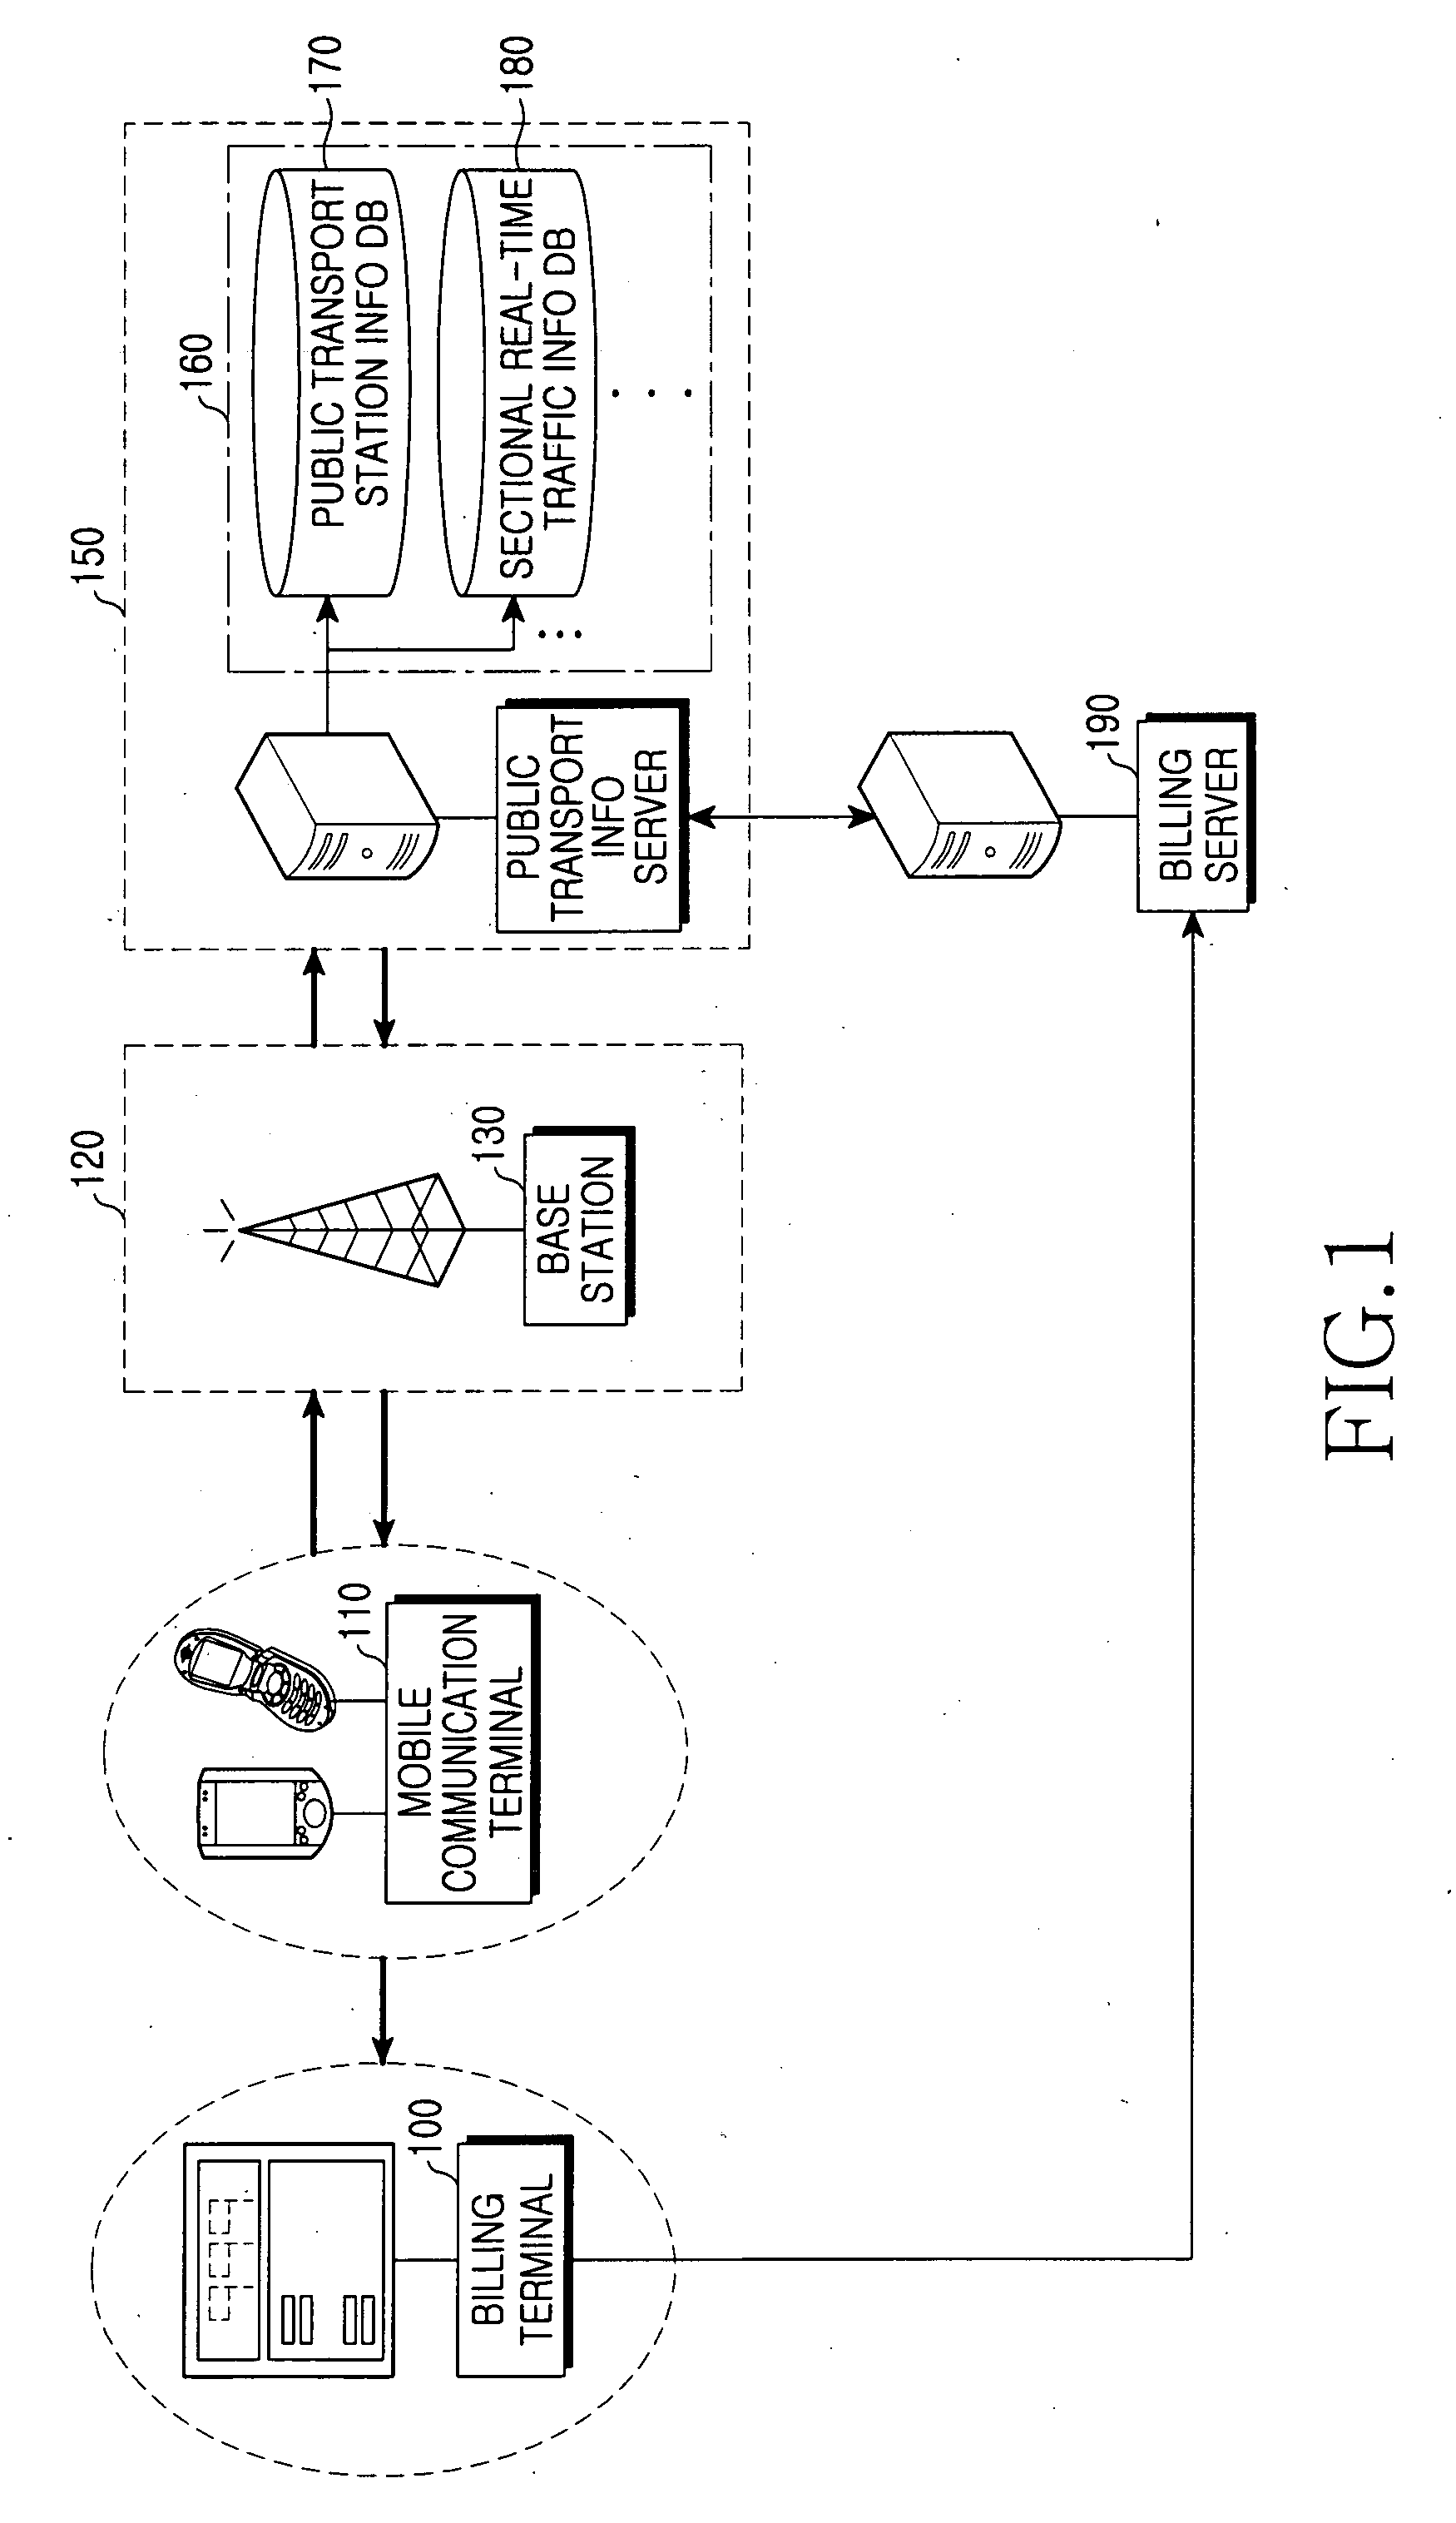 System and method for providing public transport information